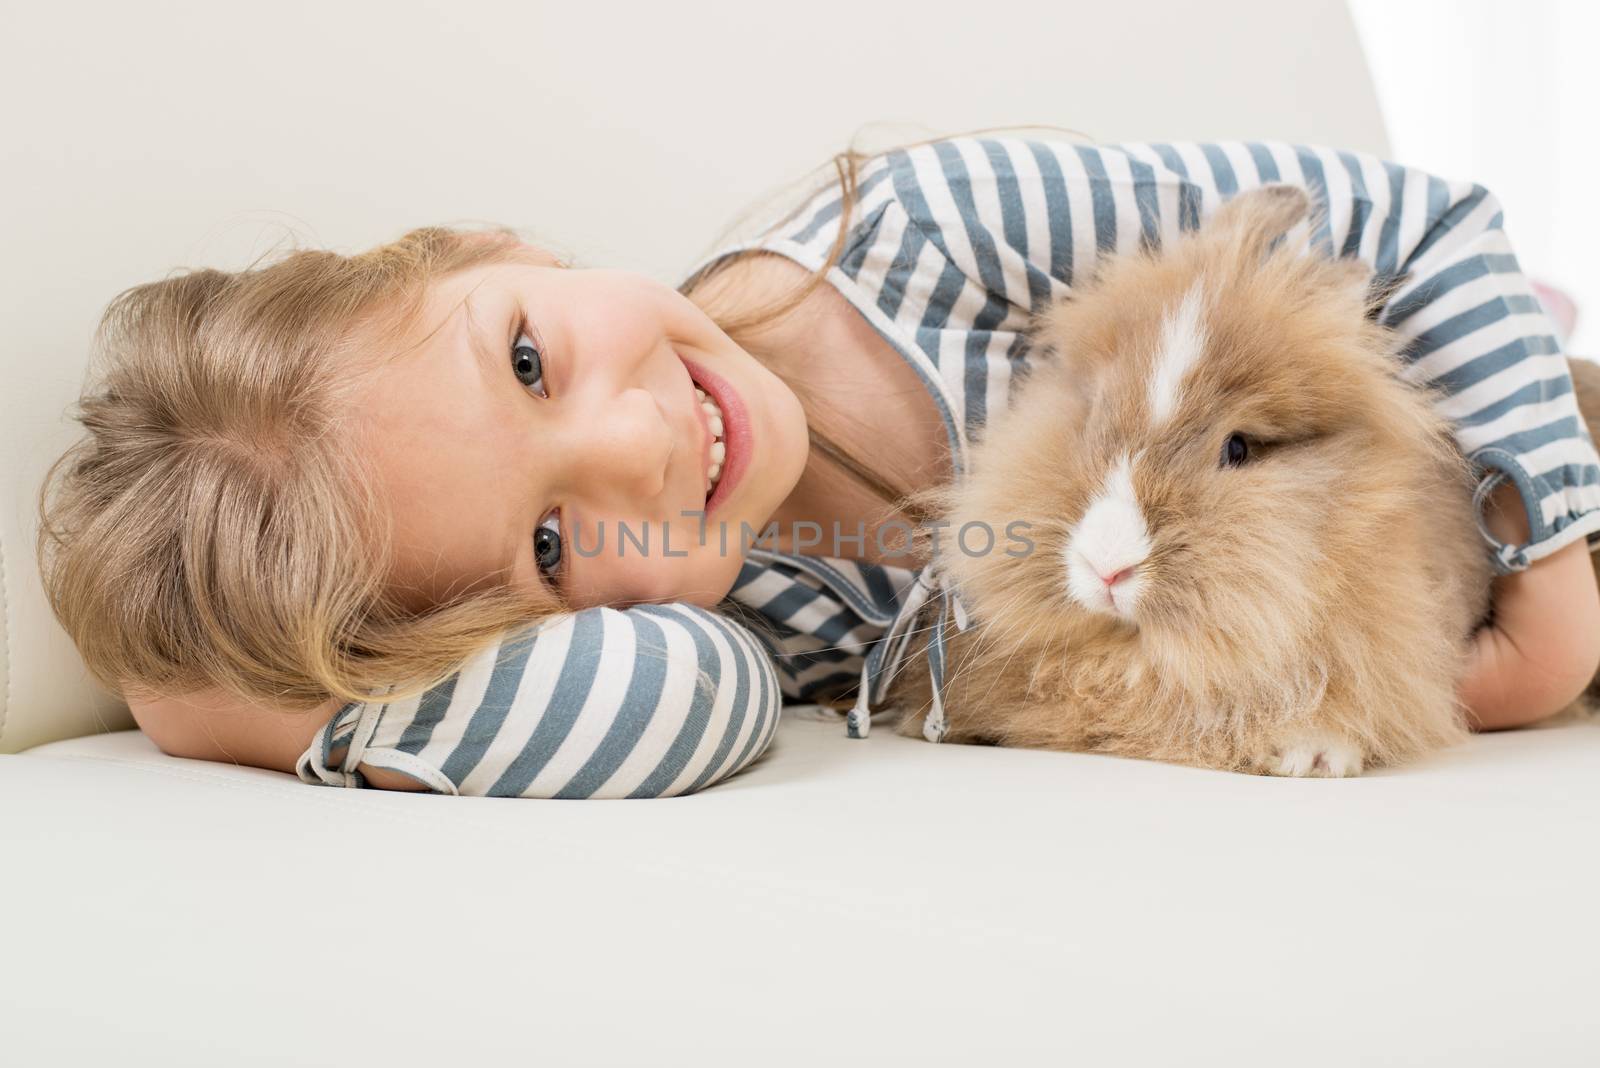 Little Girl With Bunny by MilanMarkovic78